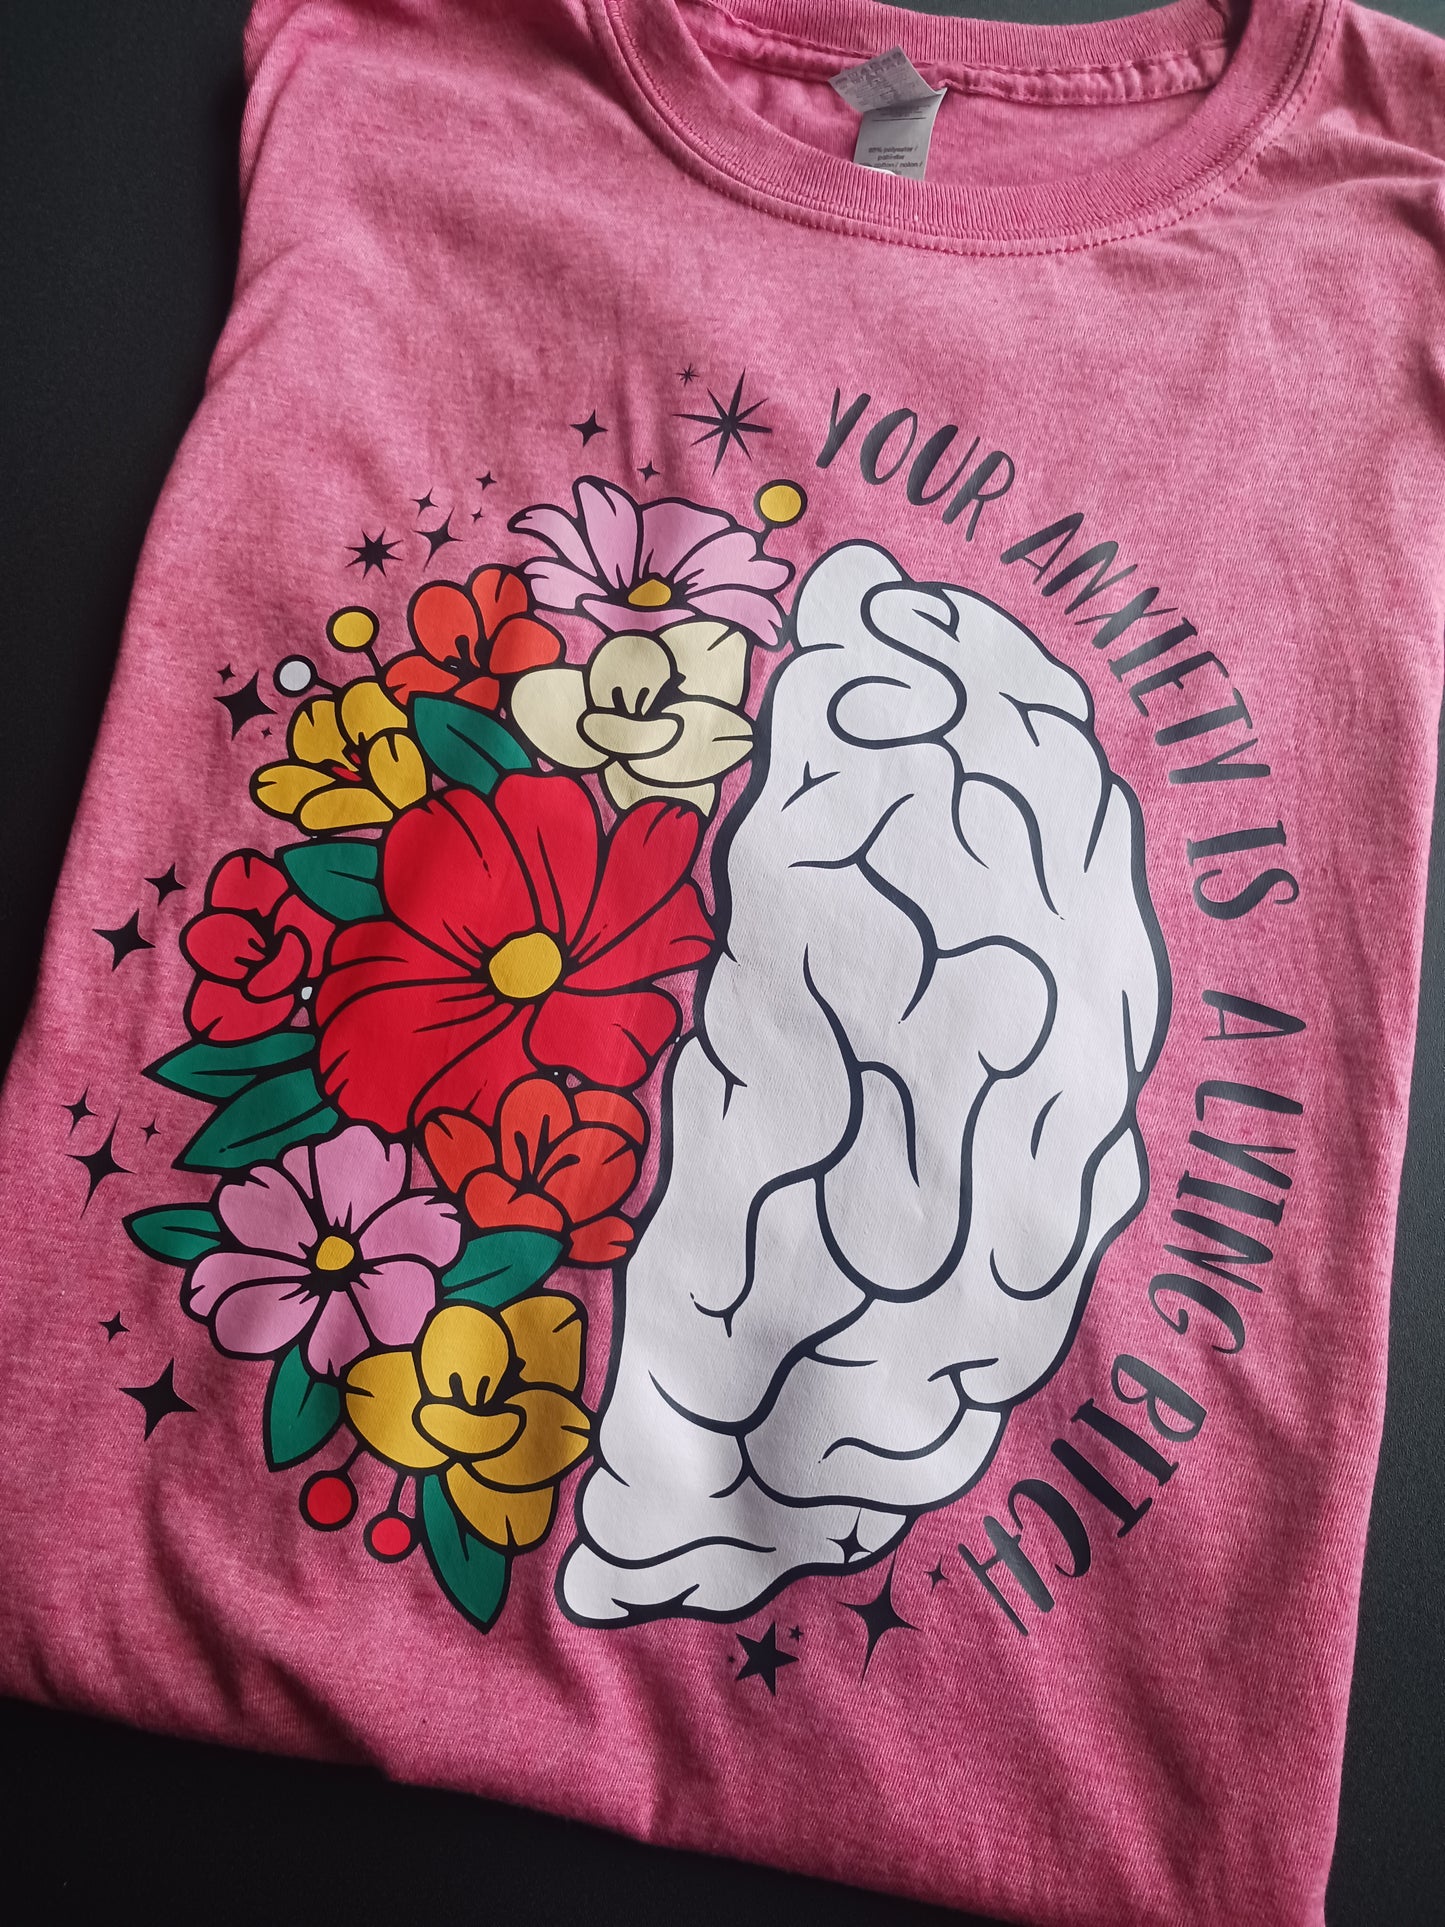 Your anxiety is lying Tshirt